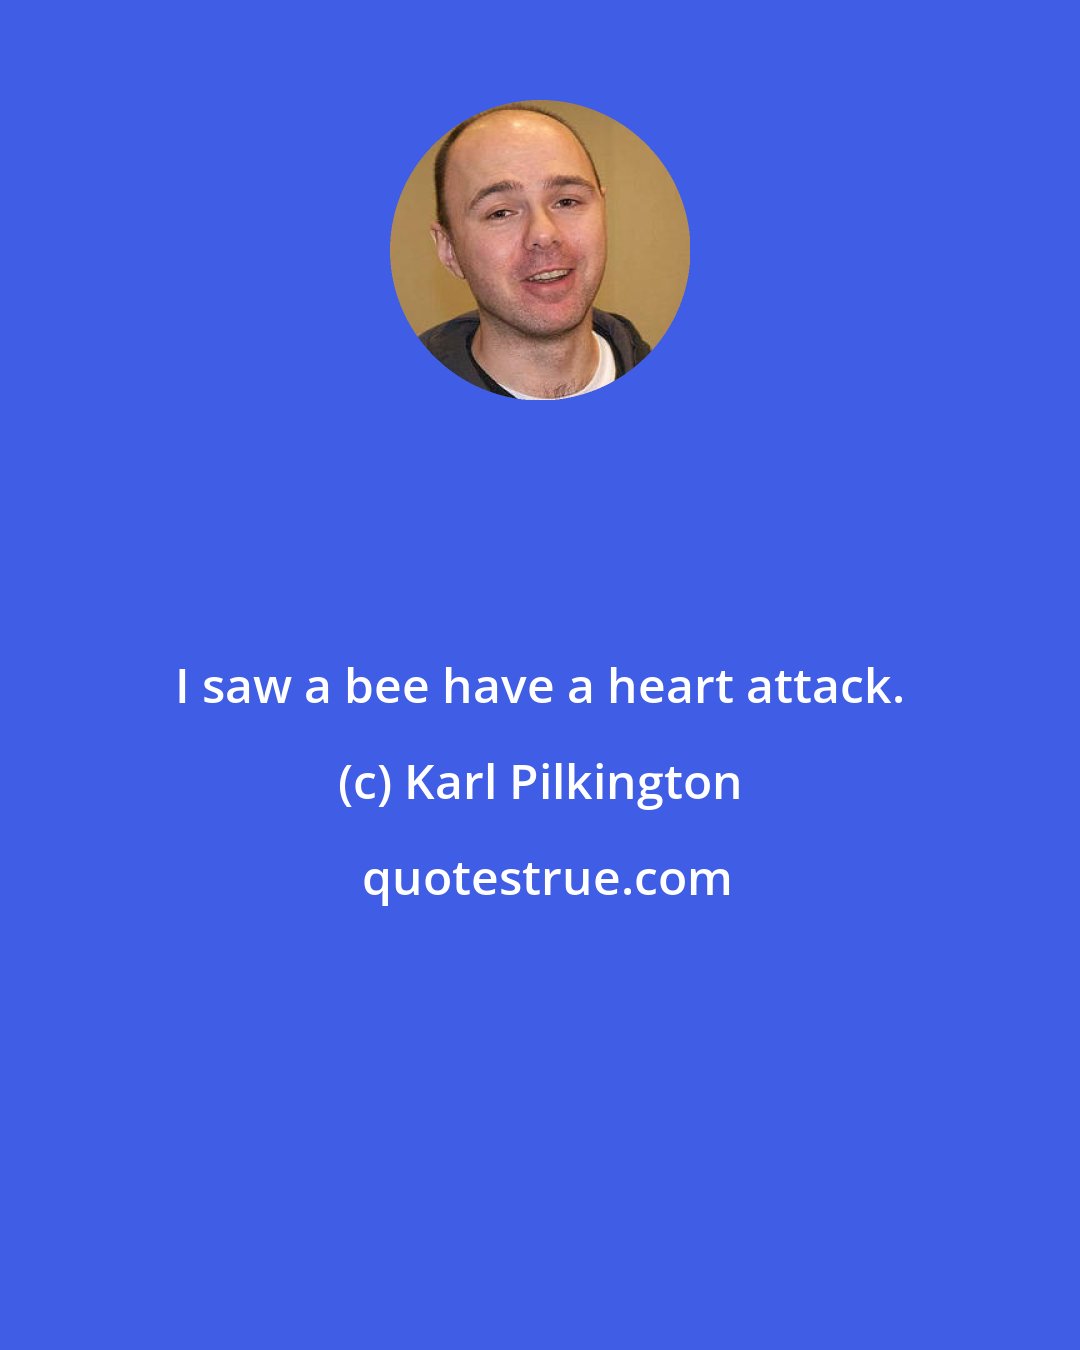 Karl Pilkington: I saw a bee have a heart attack.